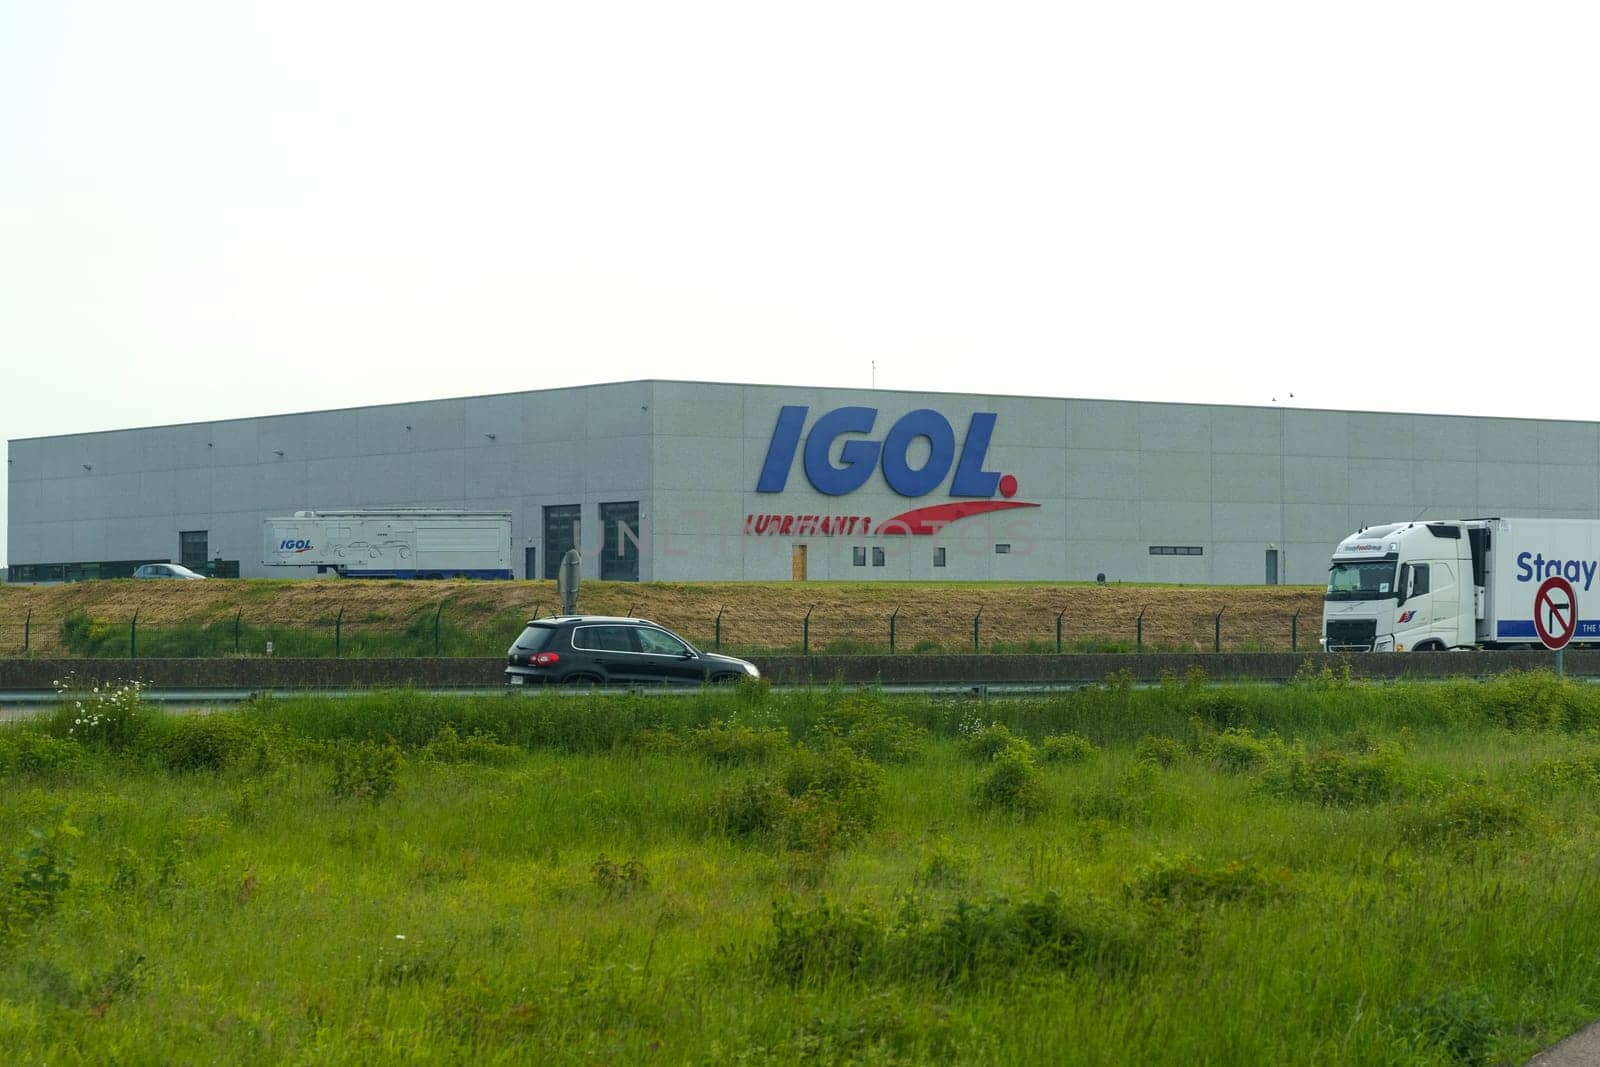 Bauvin, France - May 22, 2023:Exterior of IGOL Lubricants warehouse with logo, alongside a no parking sign and grassy embankment during the day.